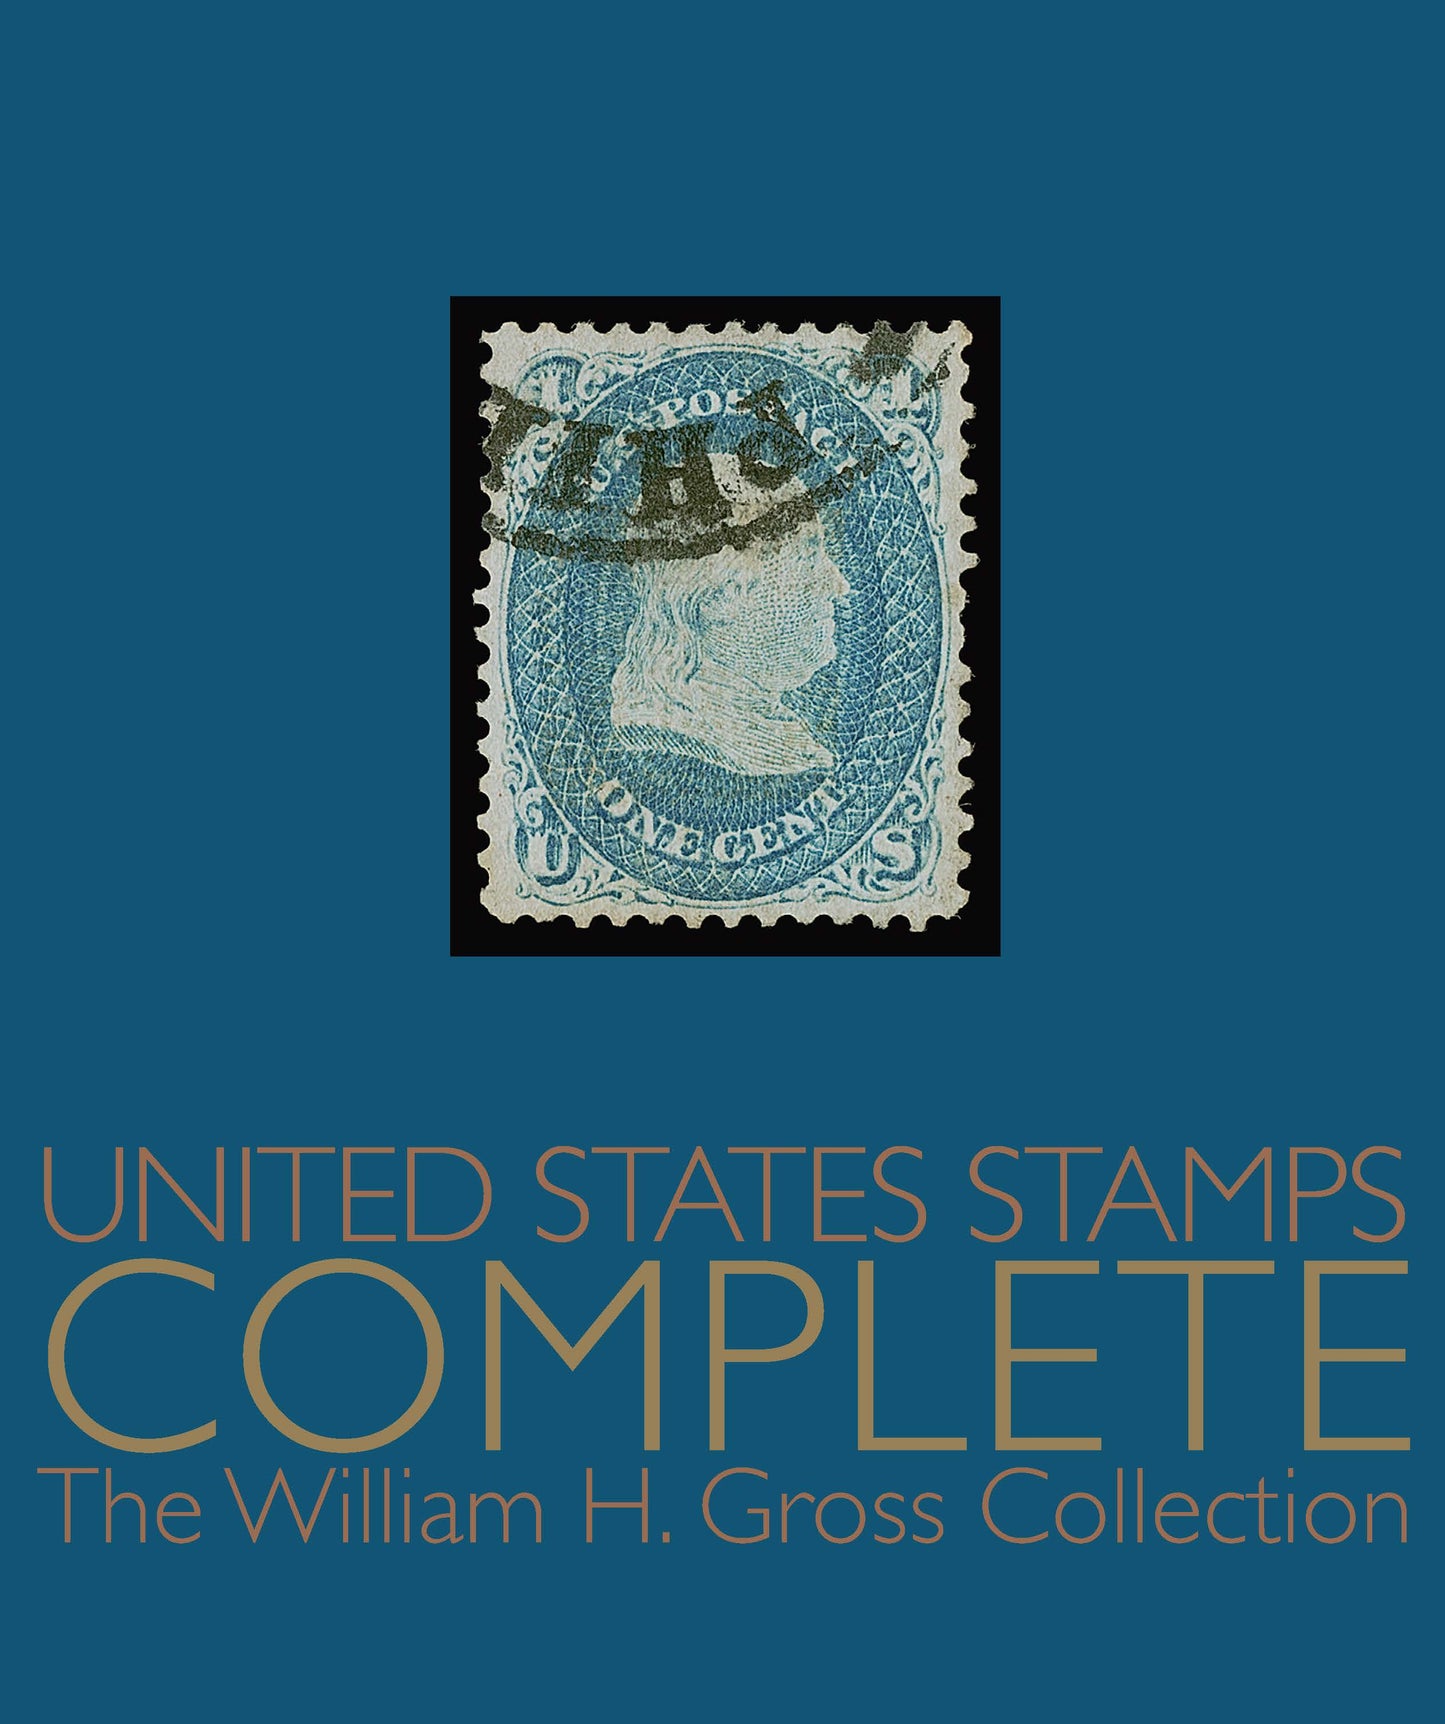 *PRE-ORDER*  The William H. Gross Collection of Complete United States Stamps Hard-Bound Catalogue